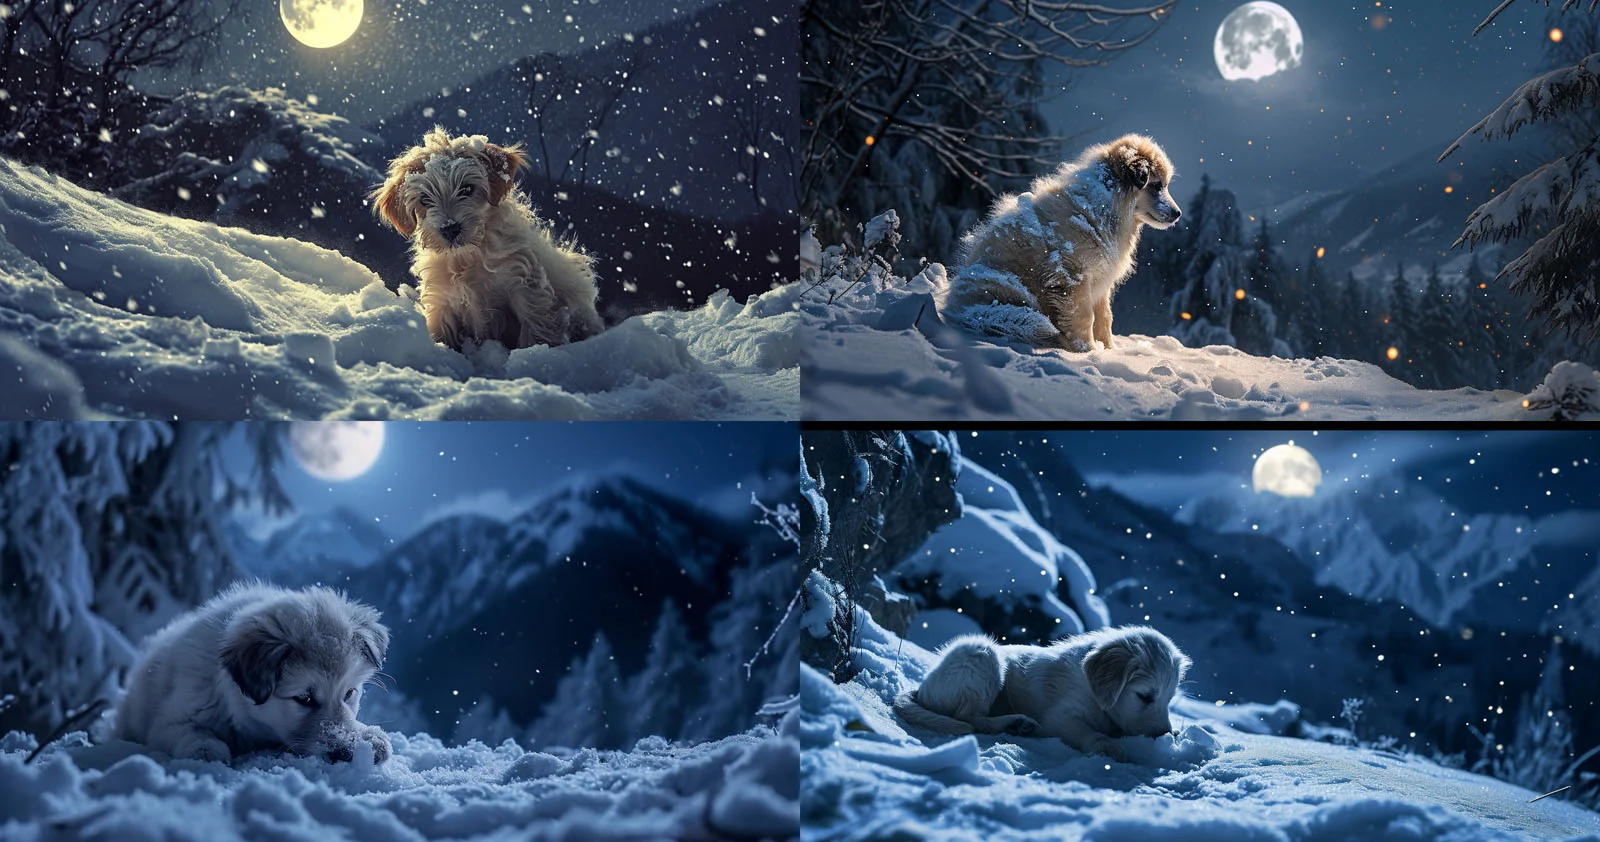 A fluffy puppy playing in the snow on a moonlit night in the mountains